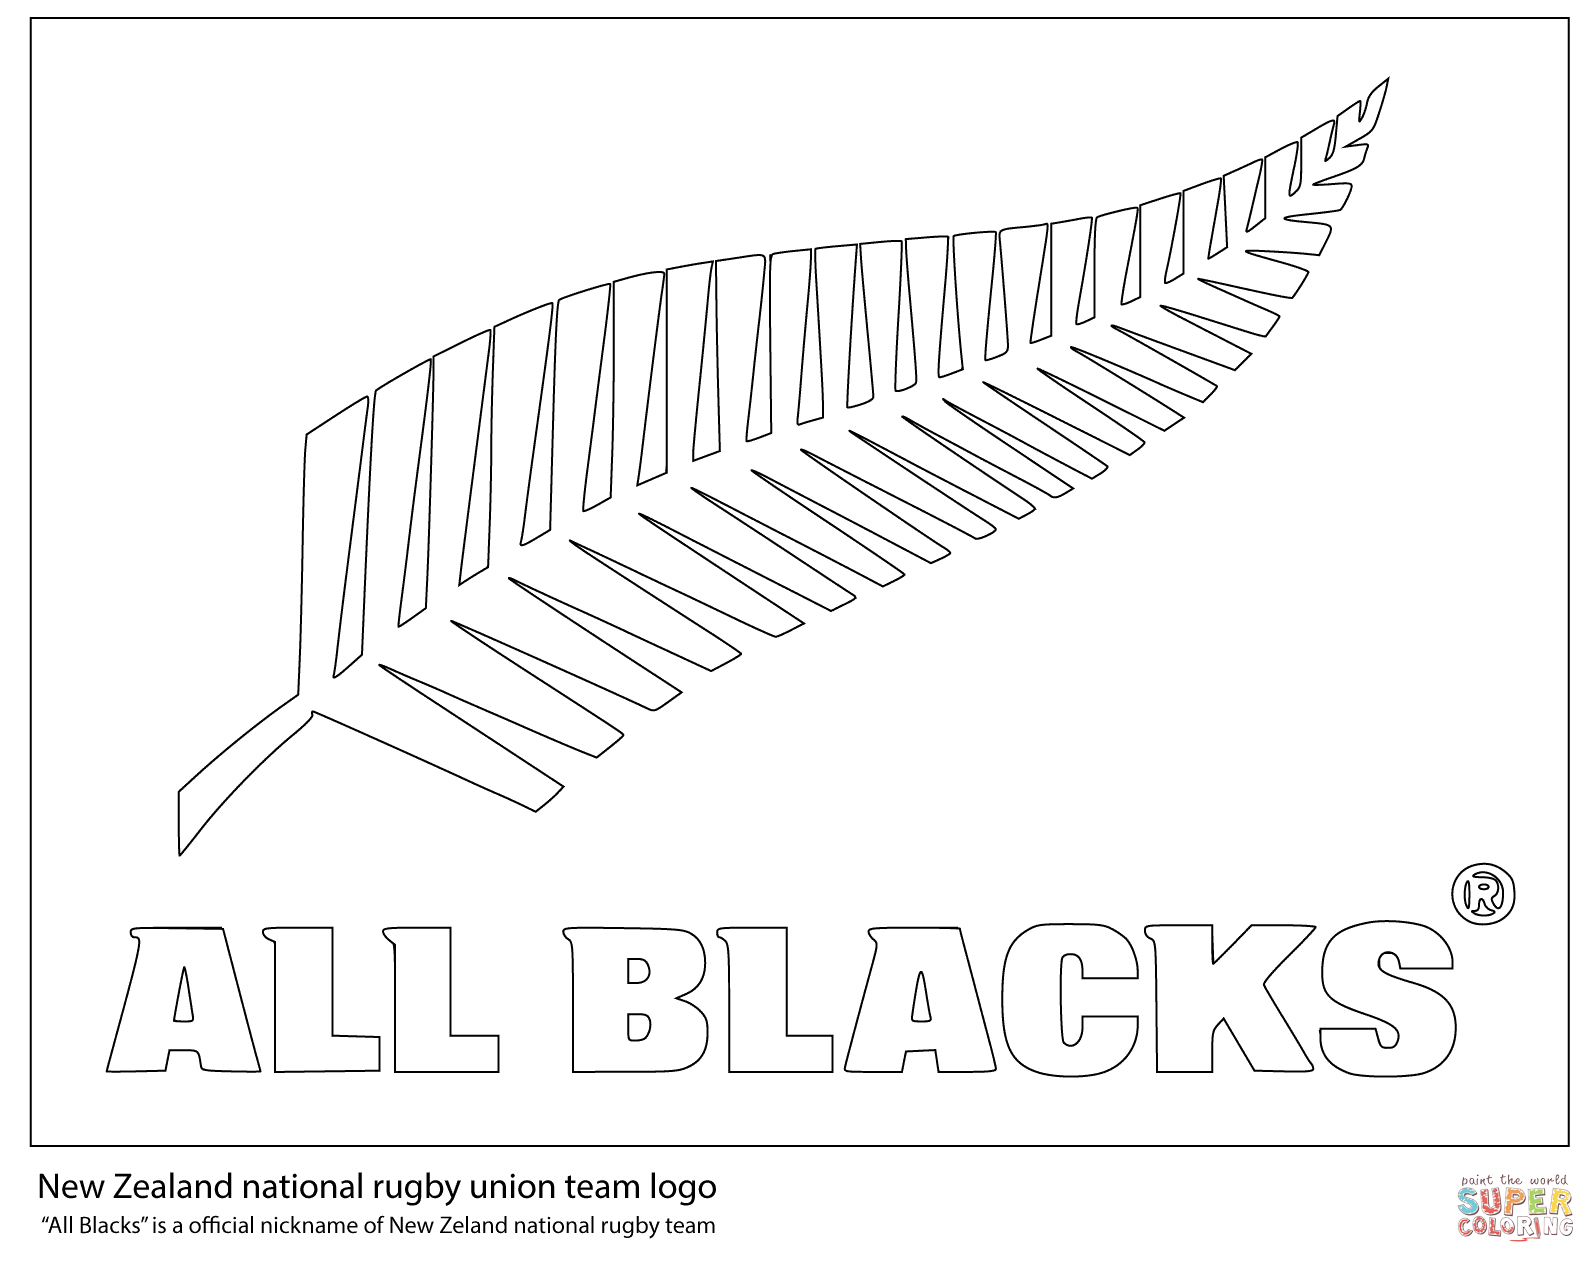 New Zealand Flag Coloring Page All Blacks New Zealand Rug Team Coloring Page Free Printable